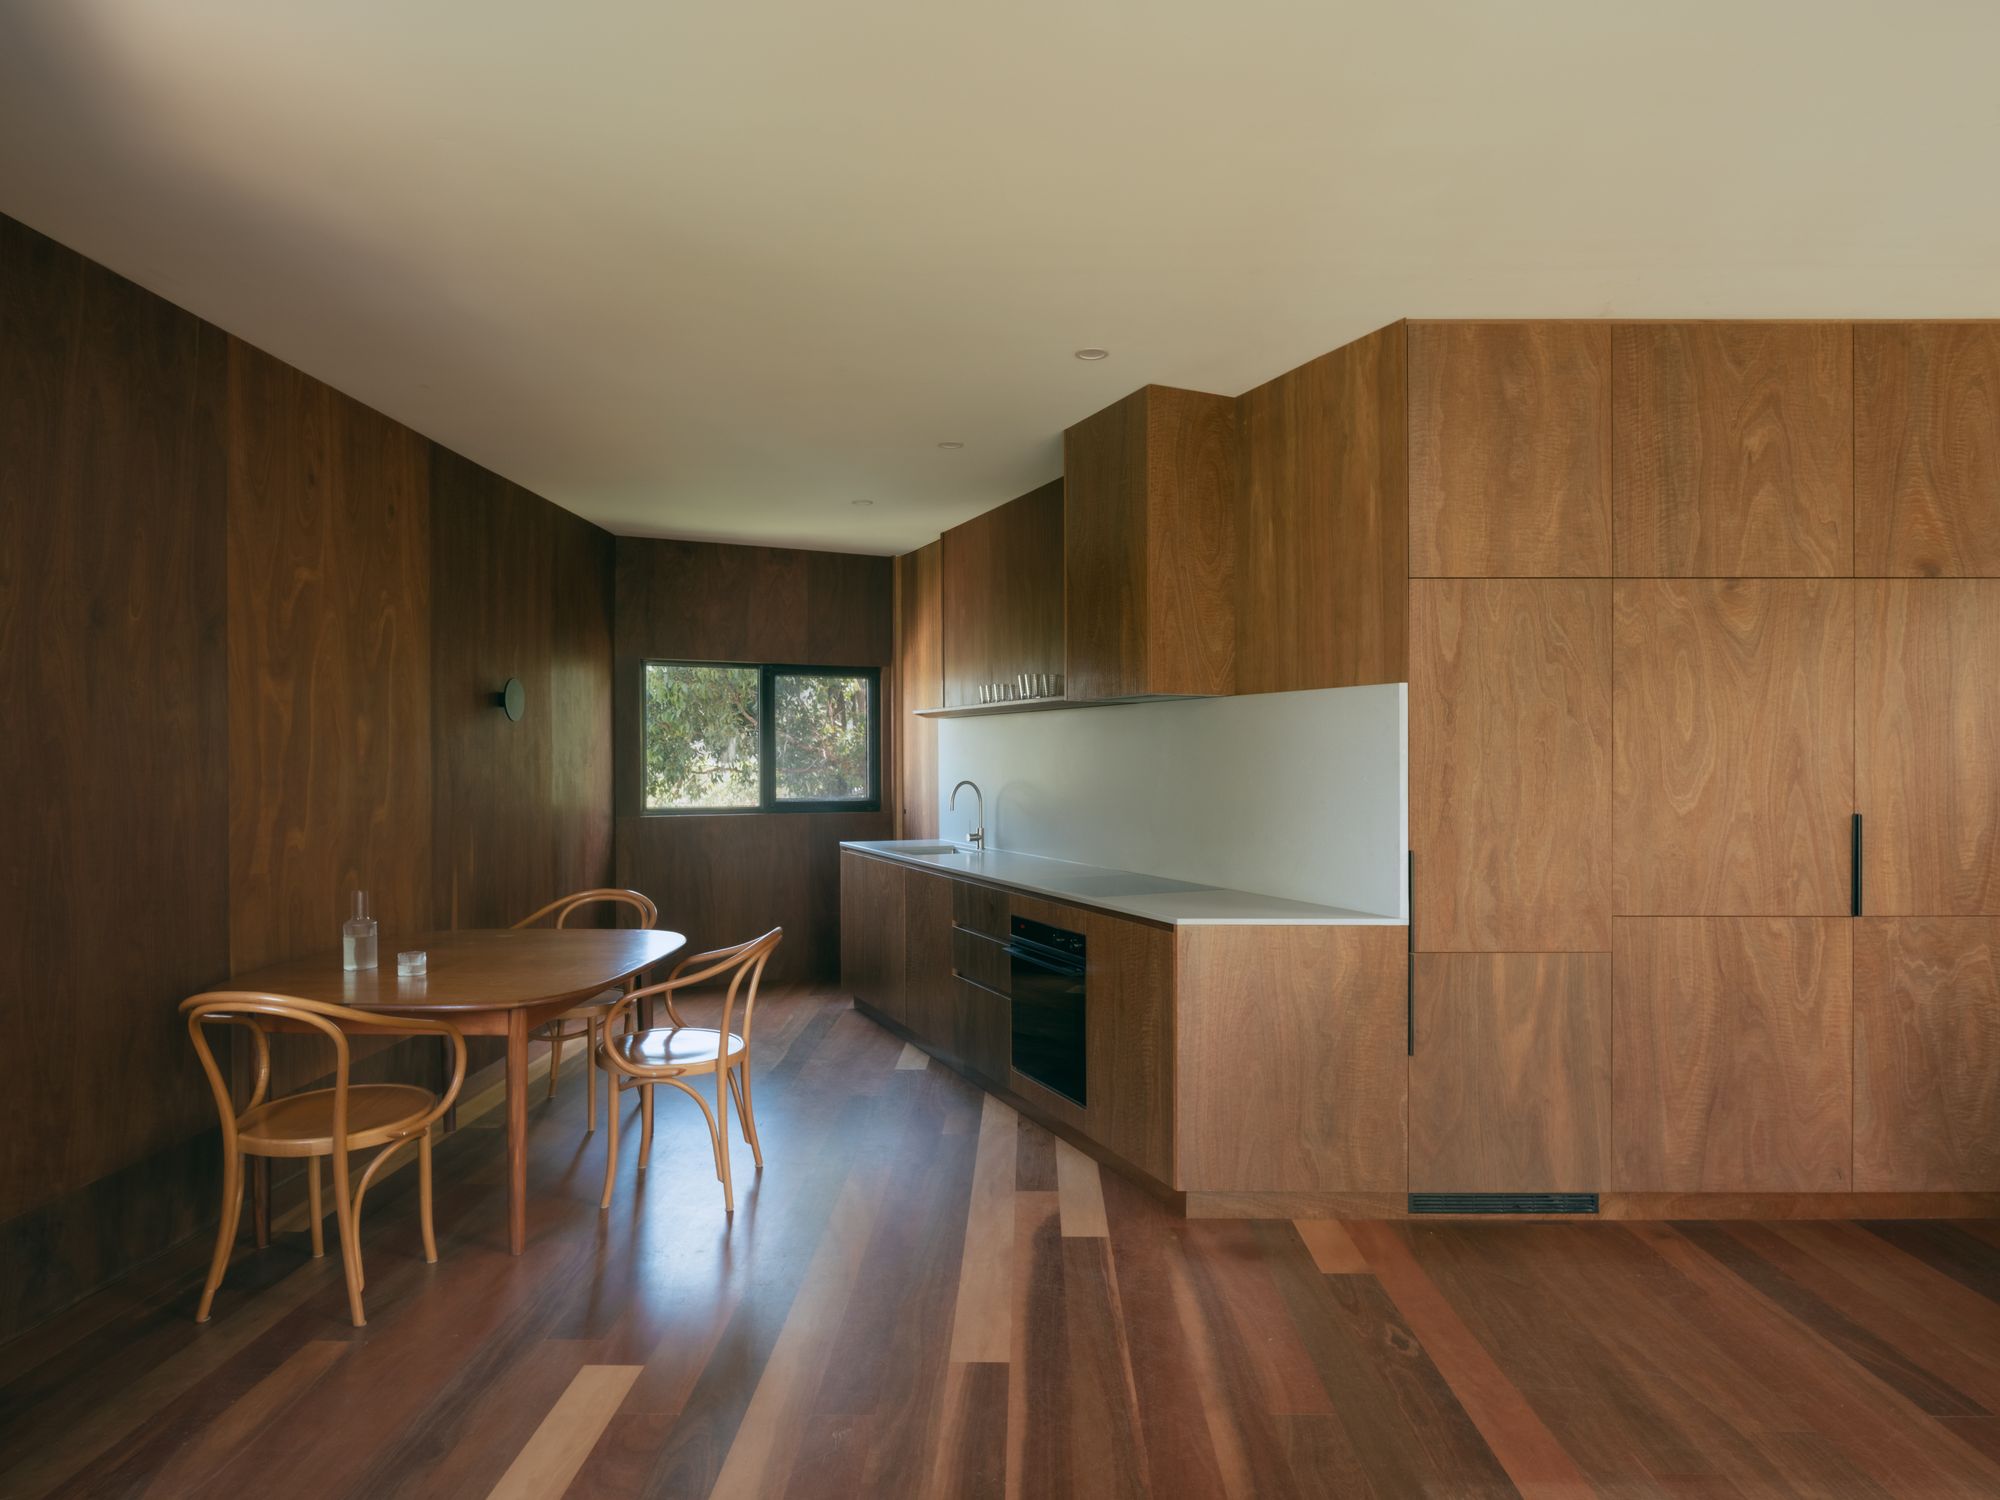 Kennett River House by MGAO showing timber joinery and floor of kitchen and dining space